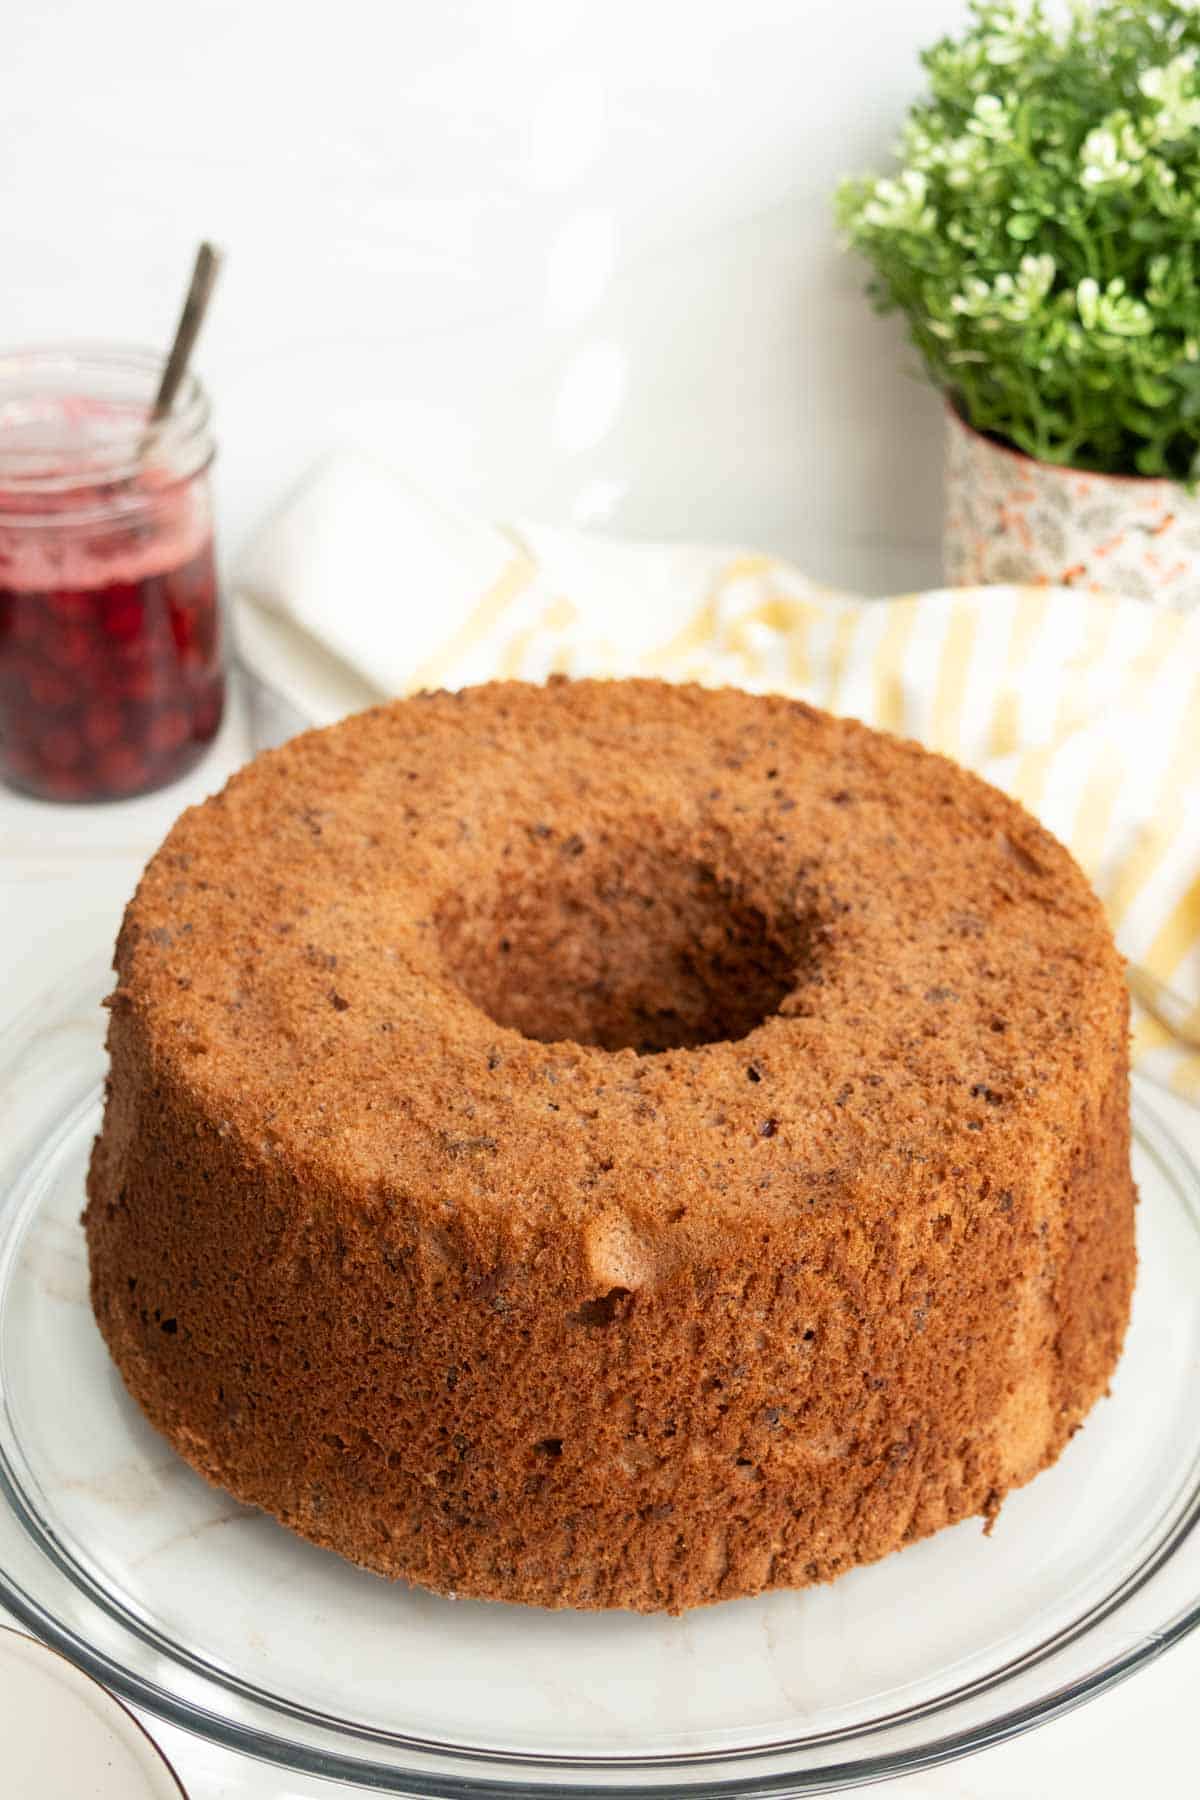 A round, golden-brown Bundt cake sits on a glass plate with a jar of red jam and a green potted plant in the background.